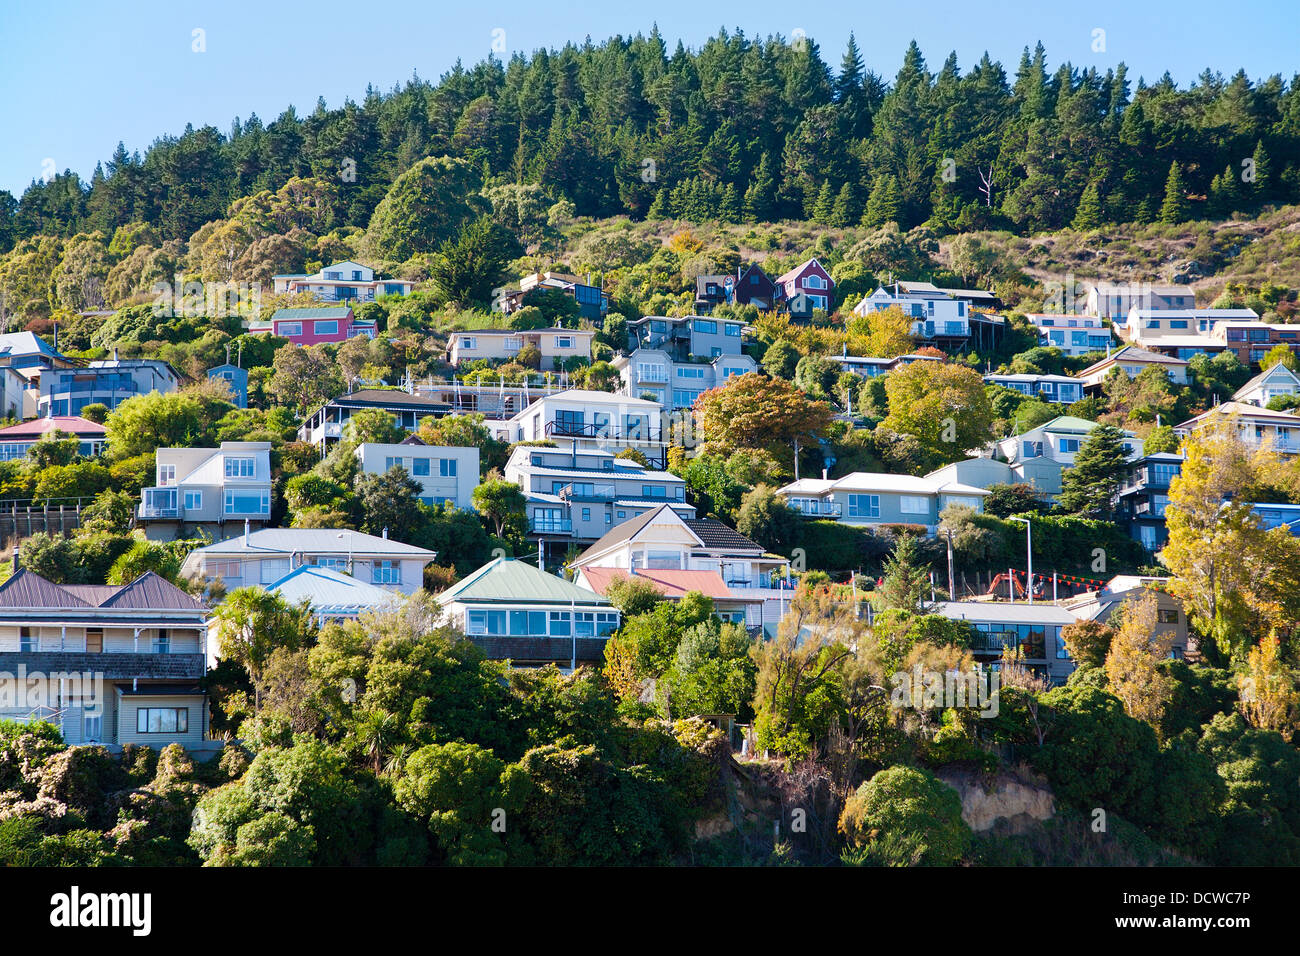 Houses on the hillside overlooking Lyttelton Harbour, Christchurch, Canterbury, South Island, New Zealand Stock Photo